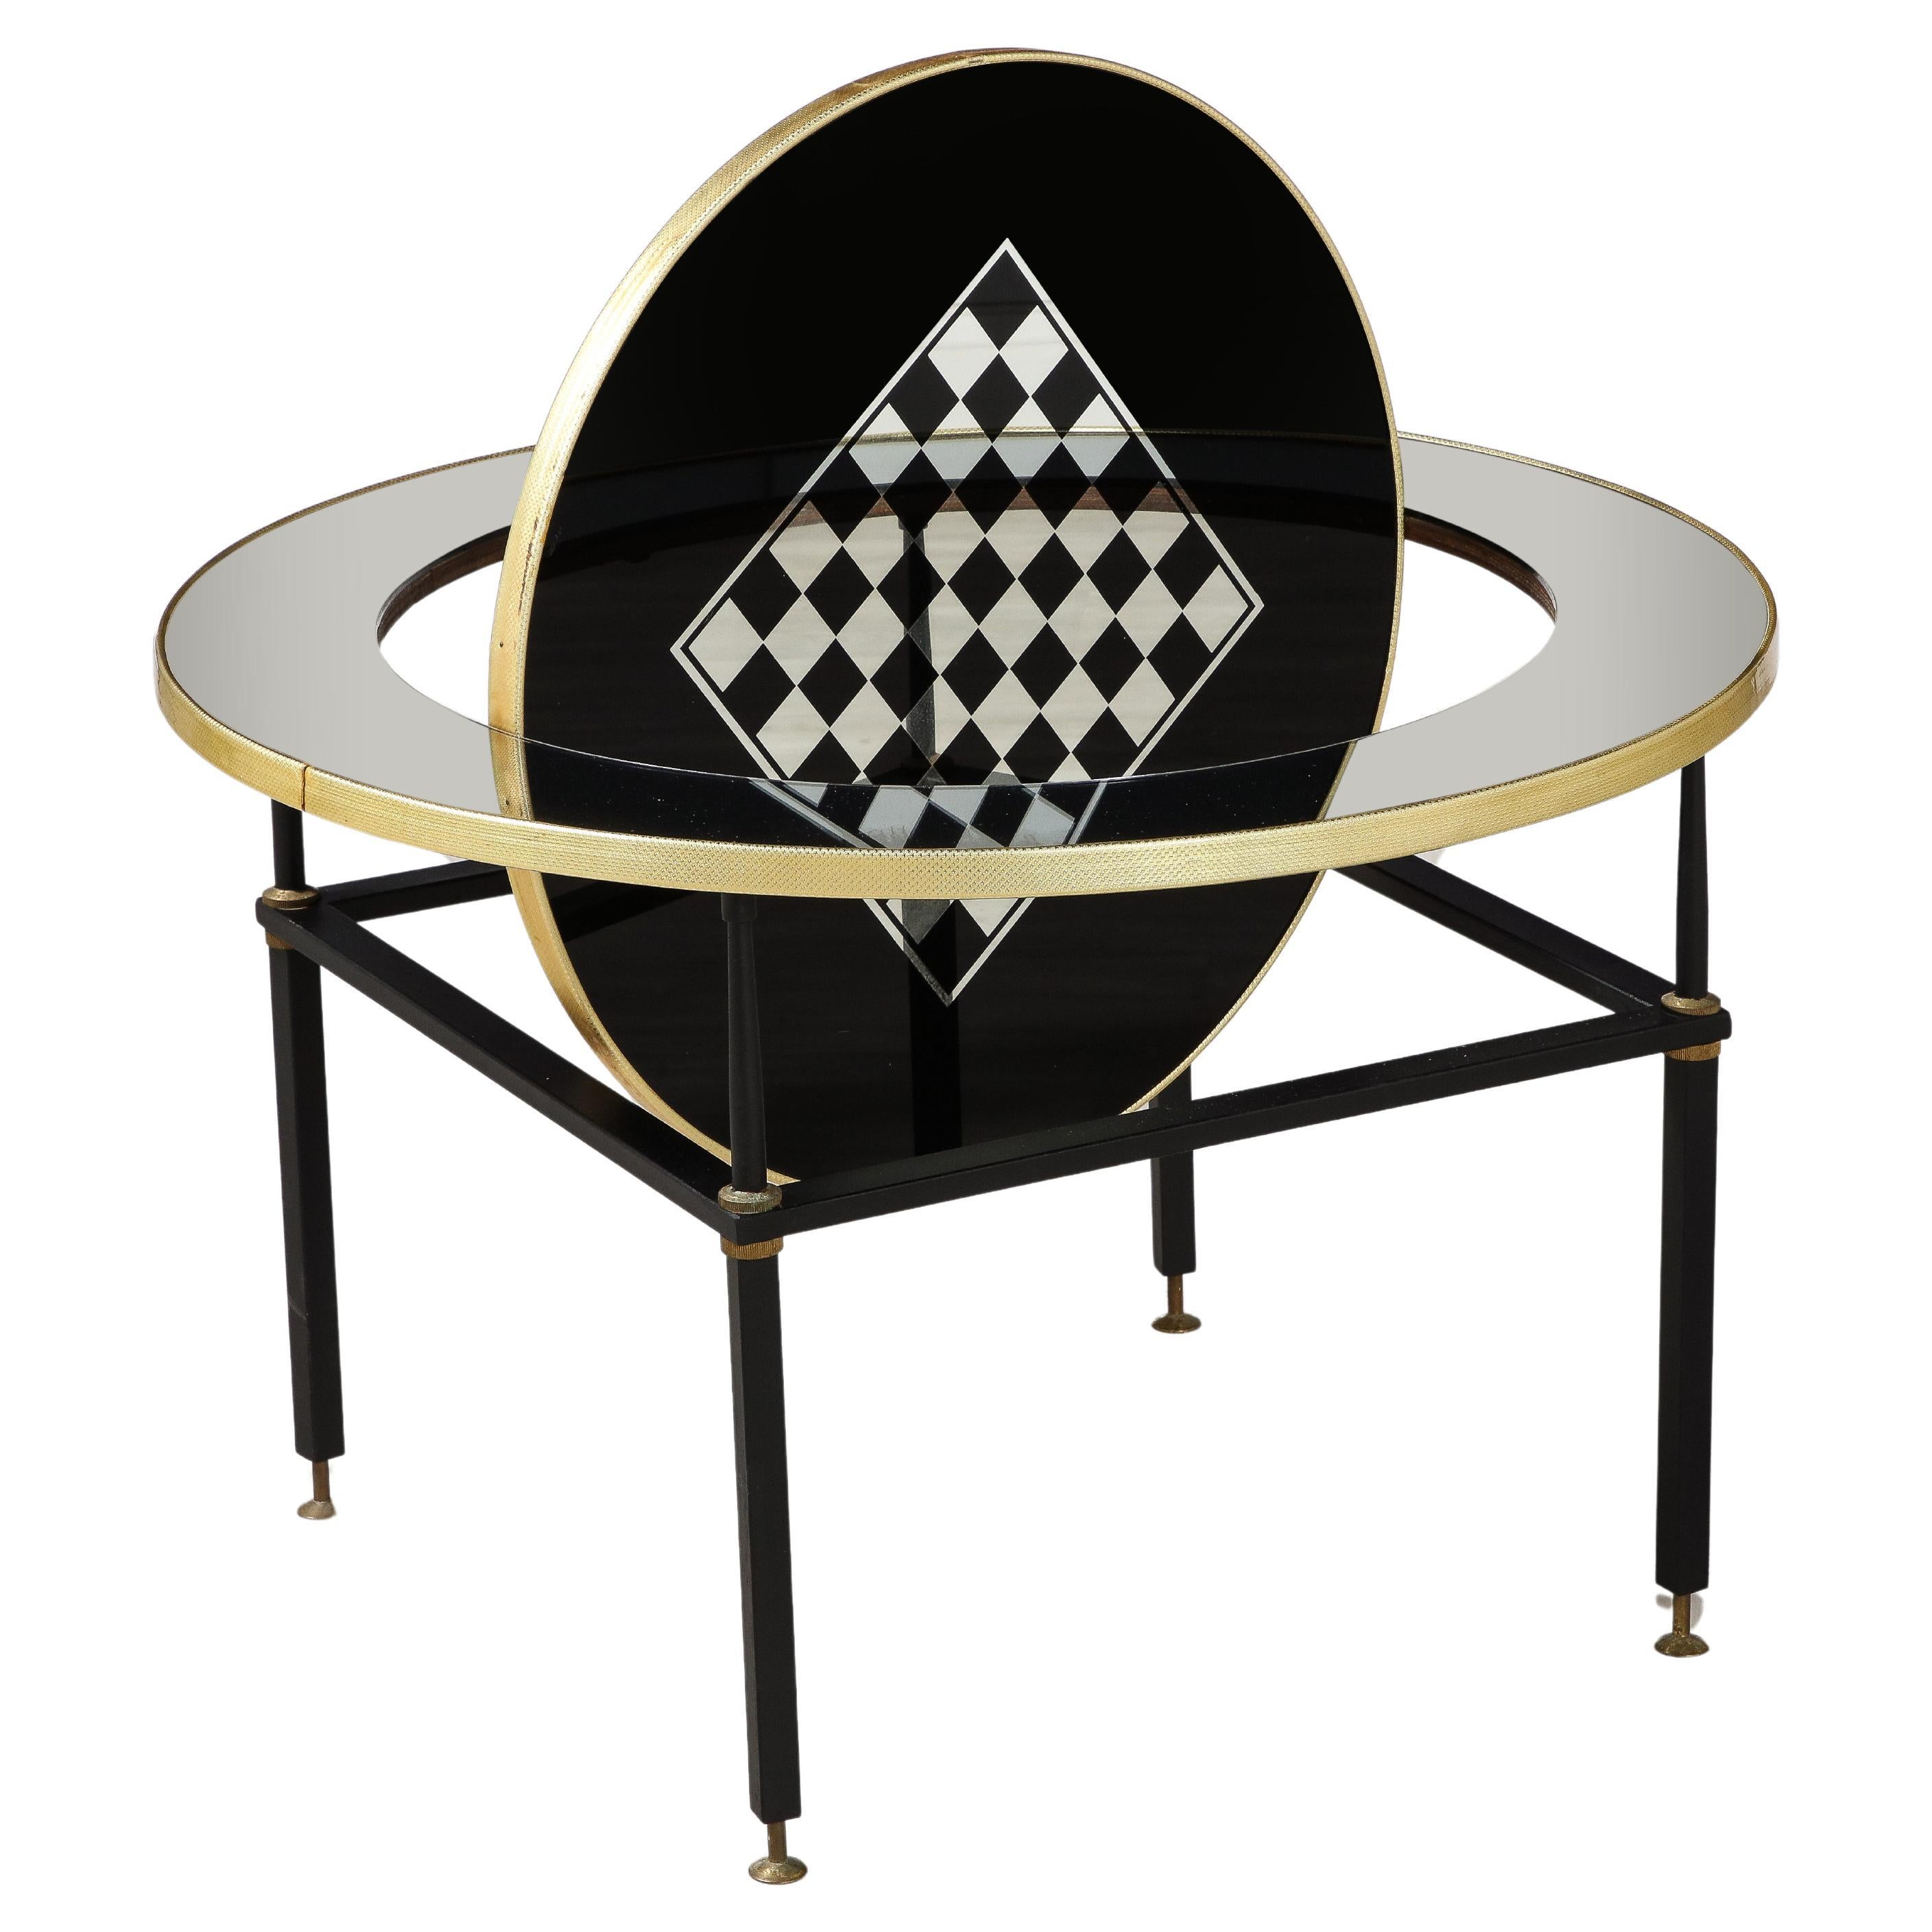 Cristal Arte Glass Table with Chess Board and Musical Motif, circa 1955 For Sale